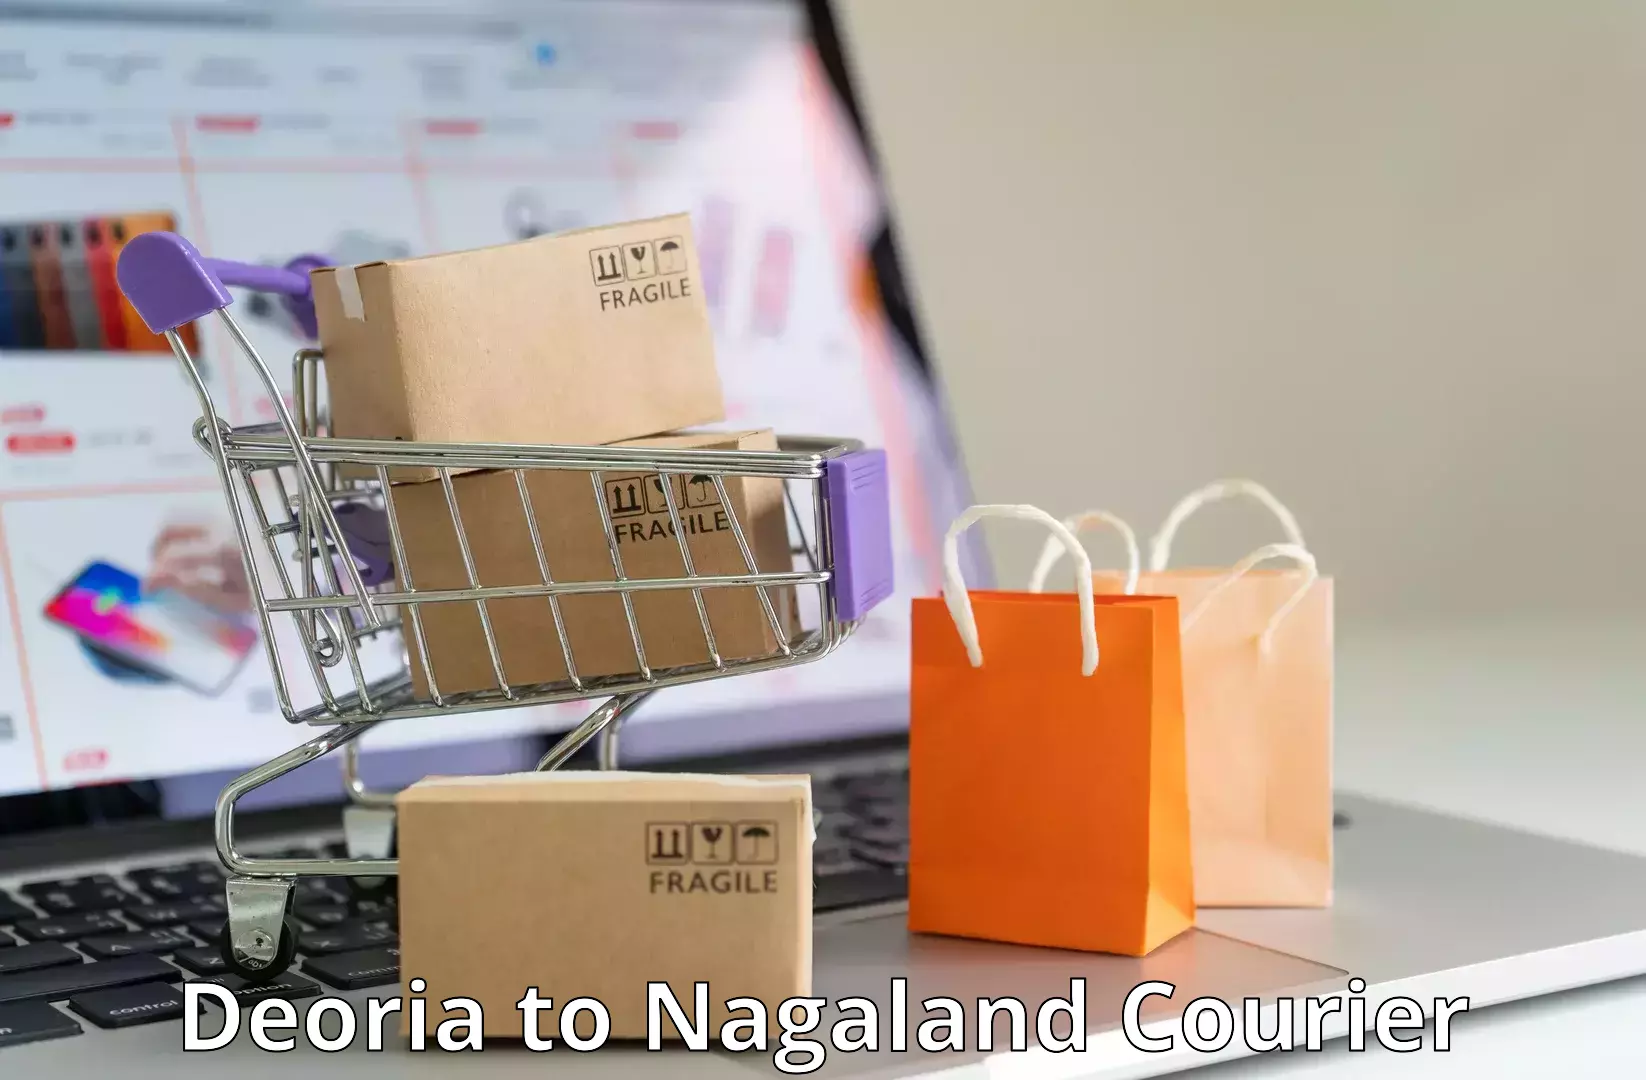 Next-day delivery options Deoria to Dimapur